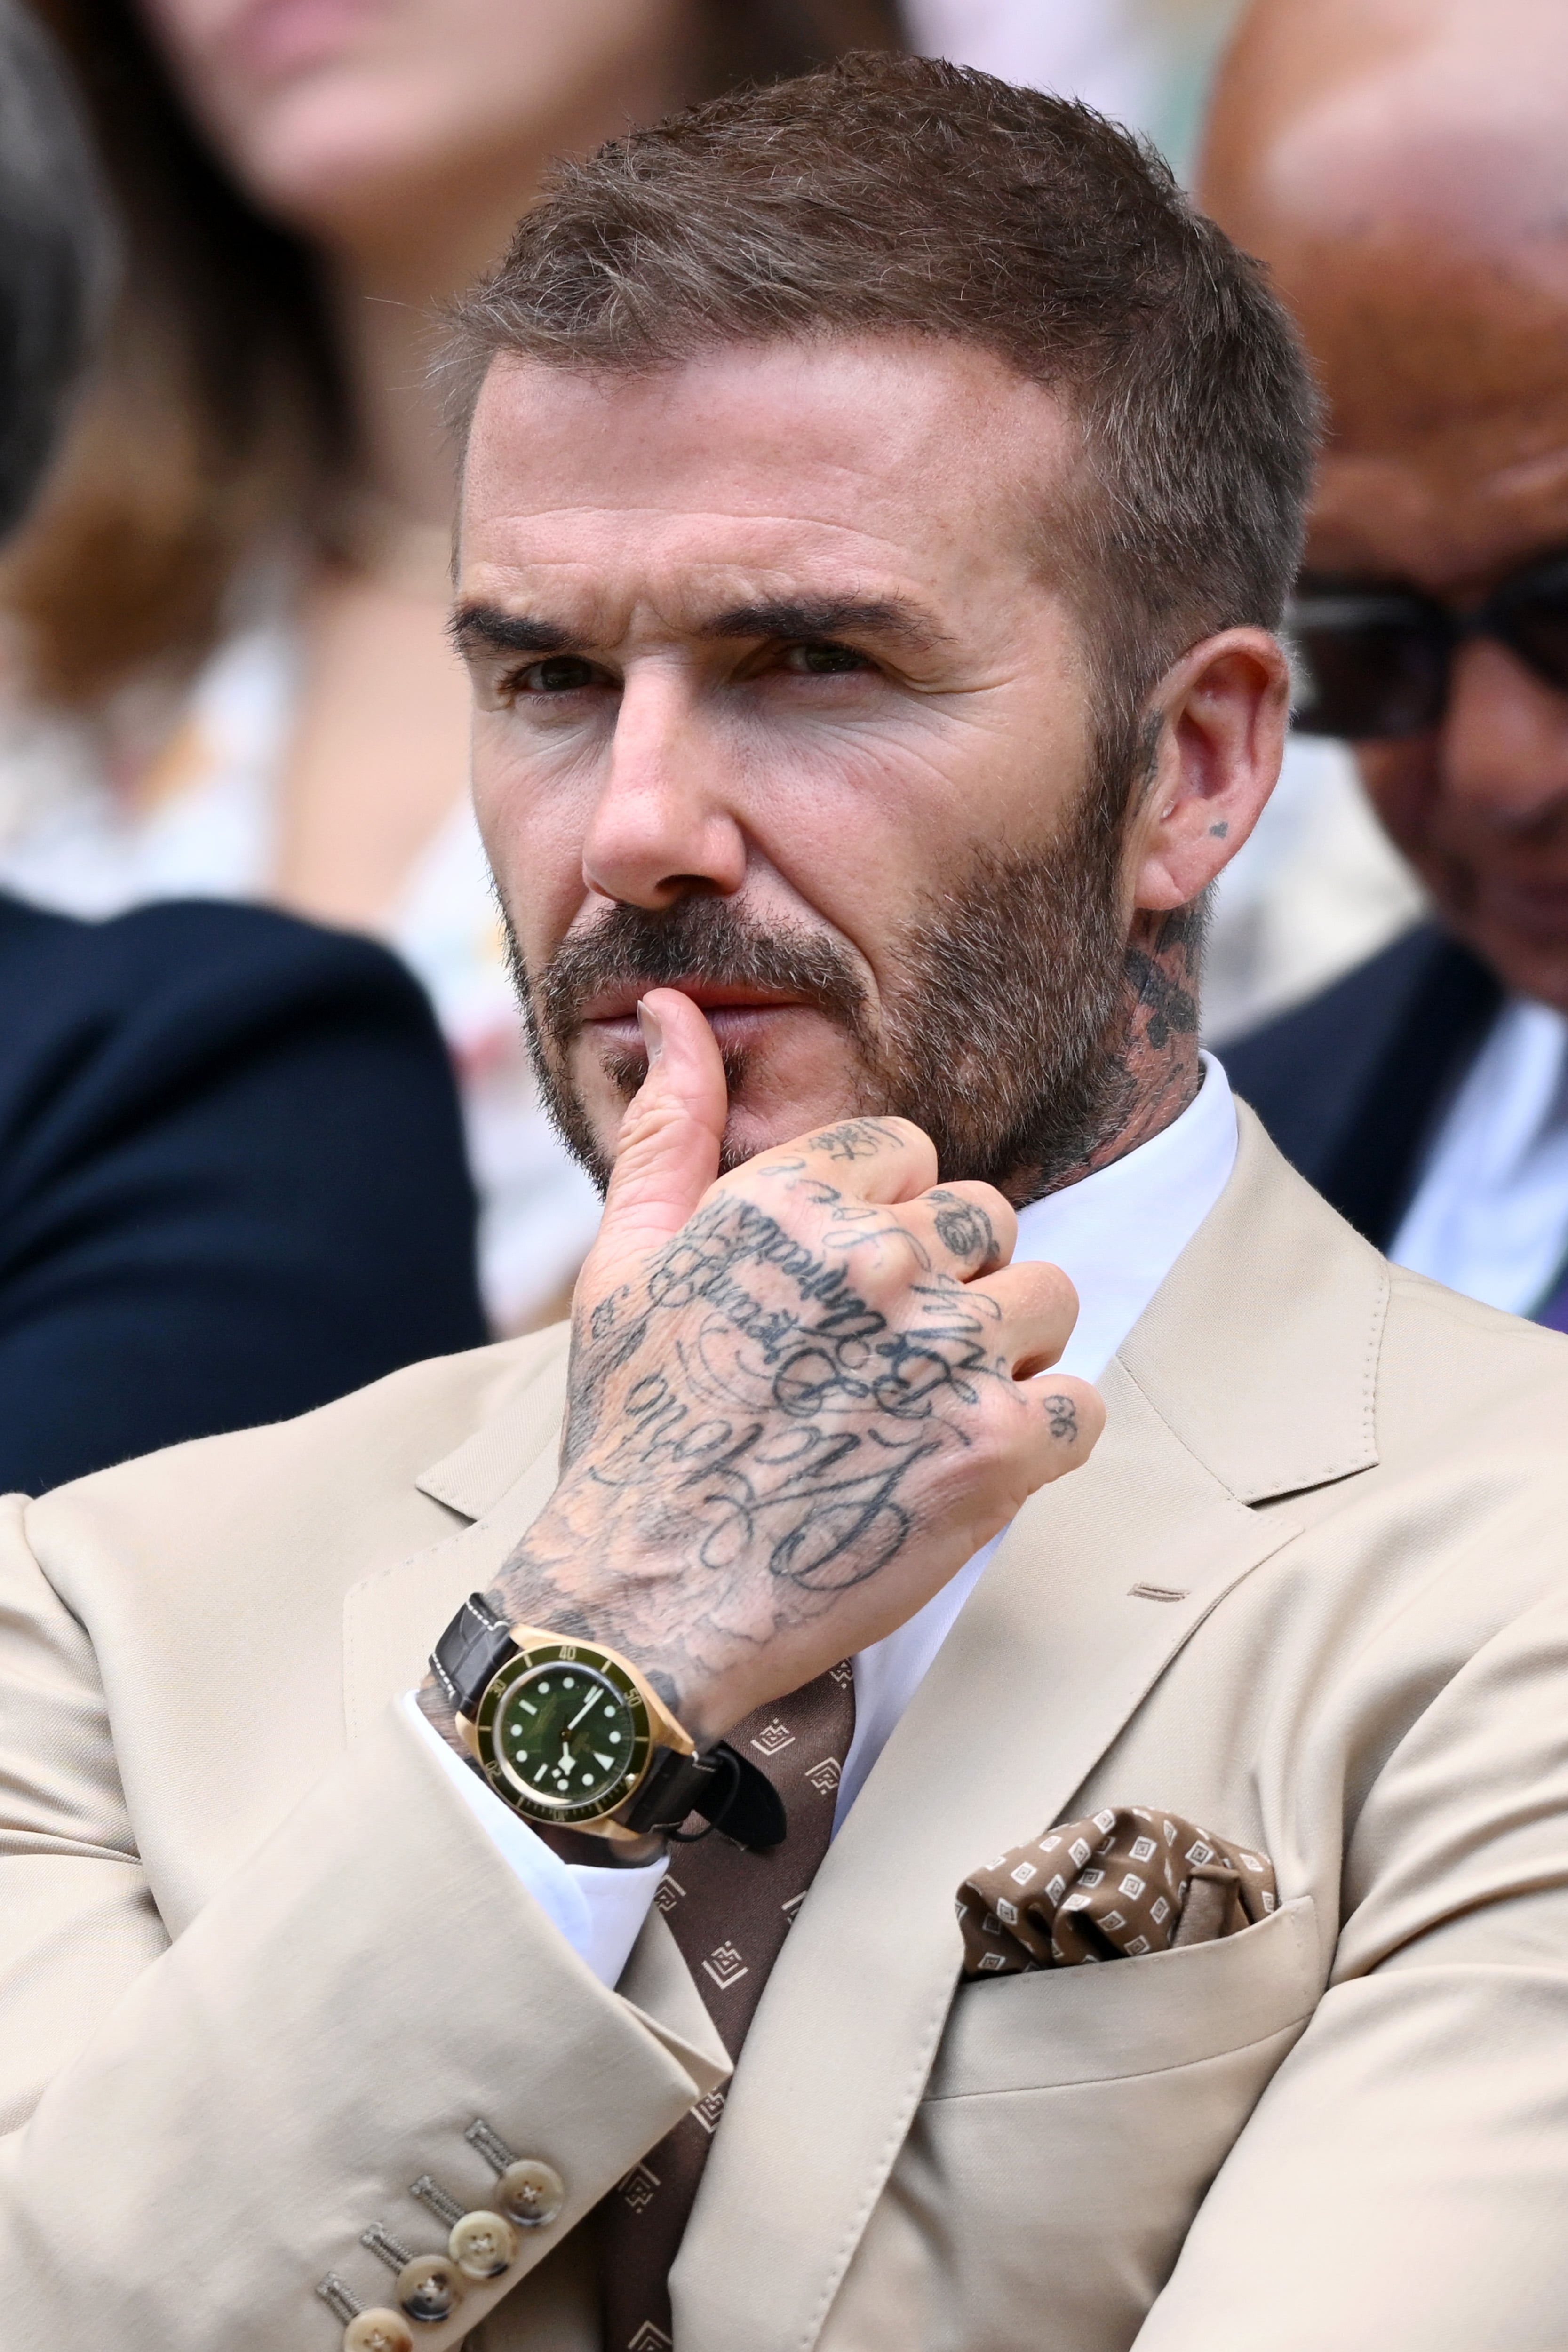 David Beckham's Tattoos and Their Meanings | POPSUGAR Beauty